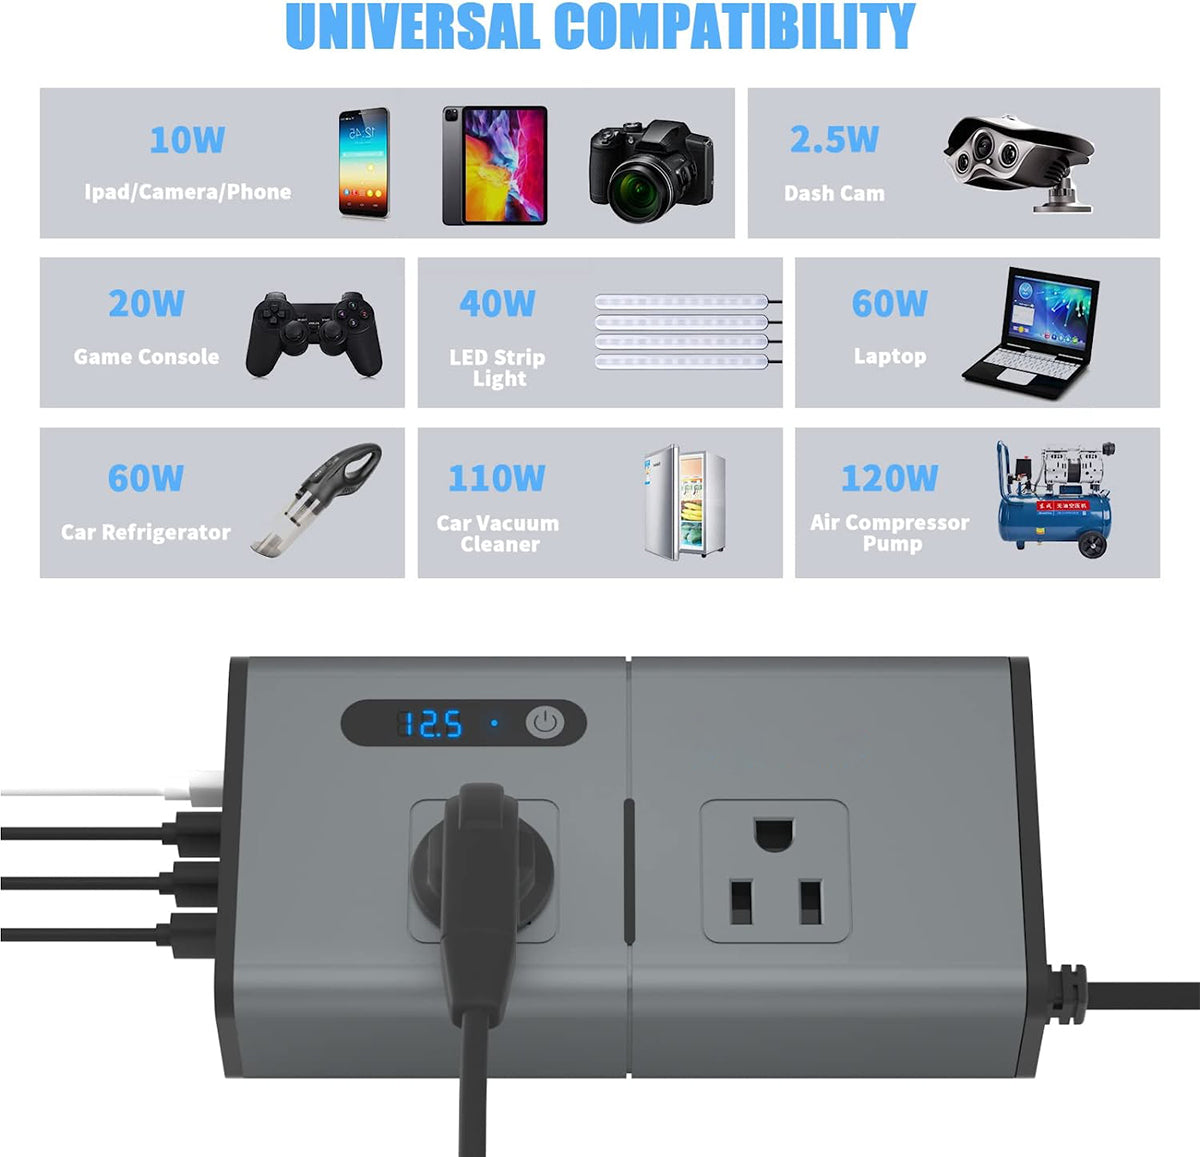 200W Car Power Inverter Newly Car Plug Adapter Outlet Charger DC 12V to 110V Car Inverter with 1.2A&2.4A USB, 1 QC3.0 USB and 1 Type C Ports